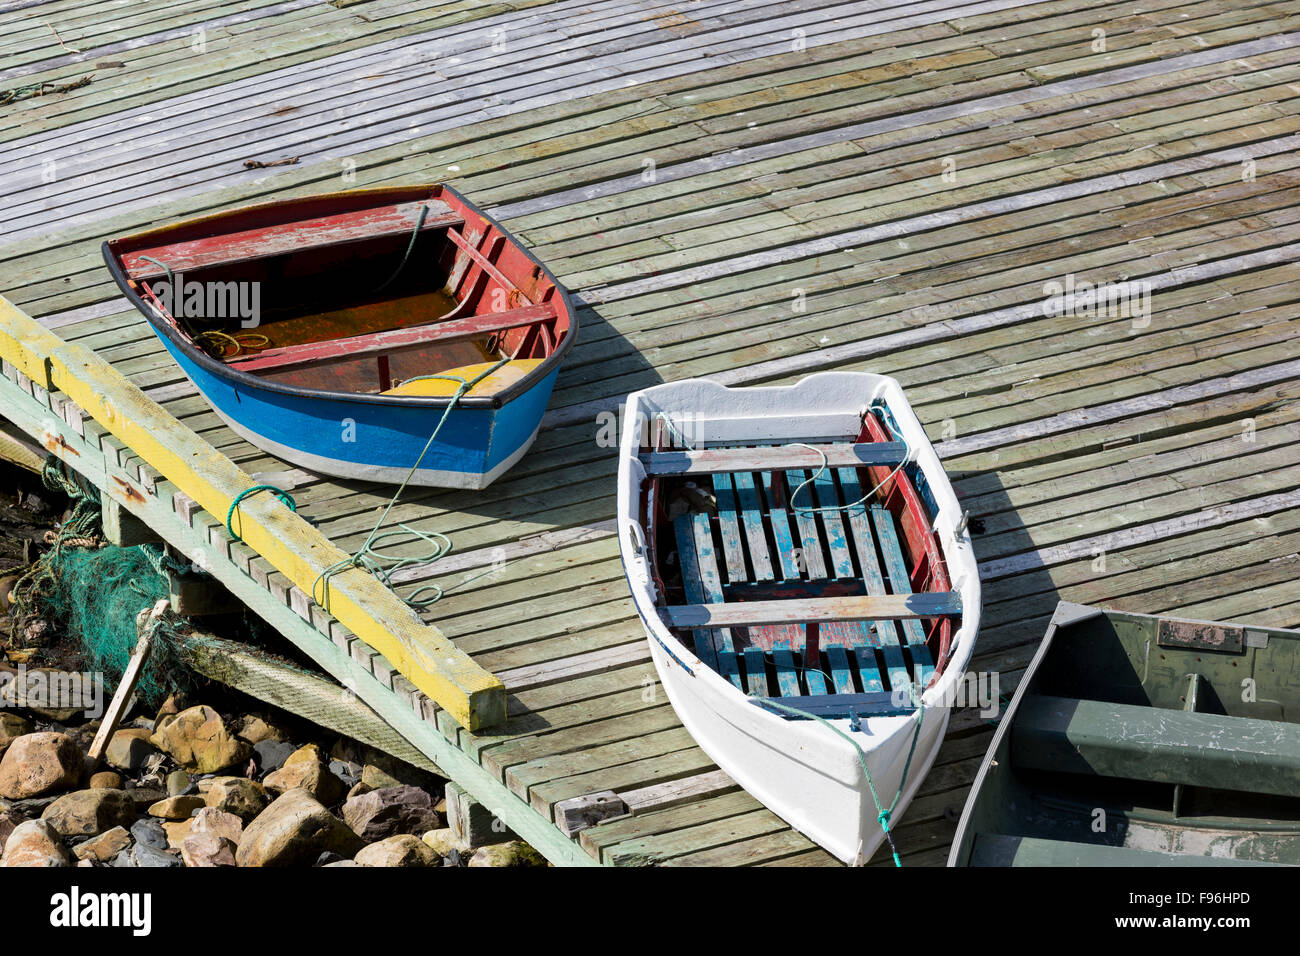 Wooden boats, Orchre Pit Cove, Newfoundland, Canada Stock Photo